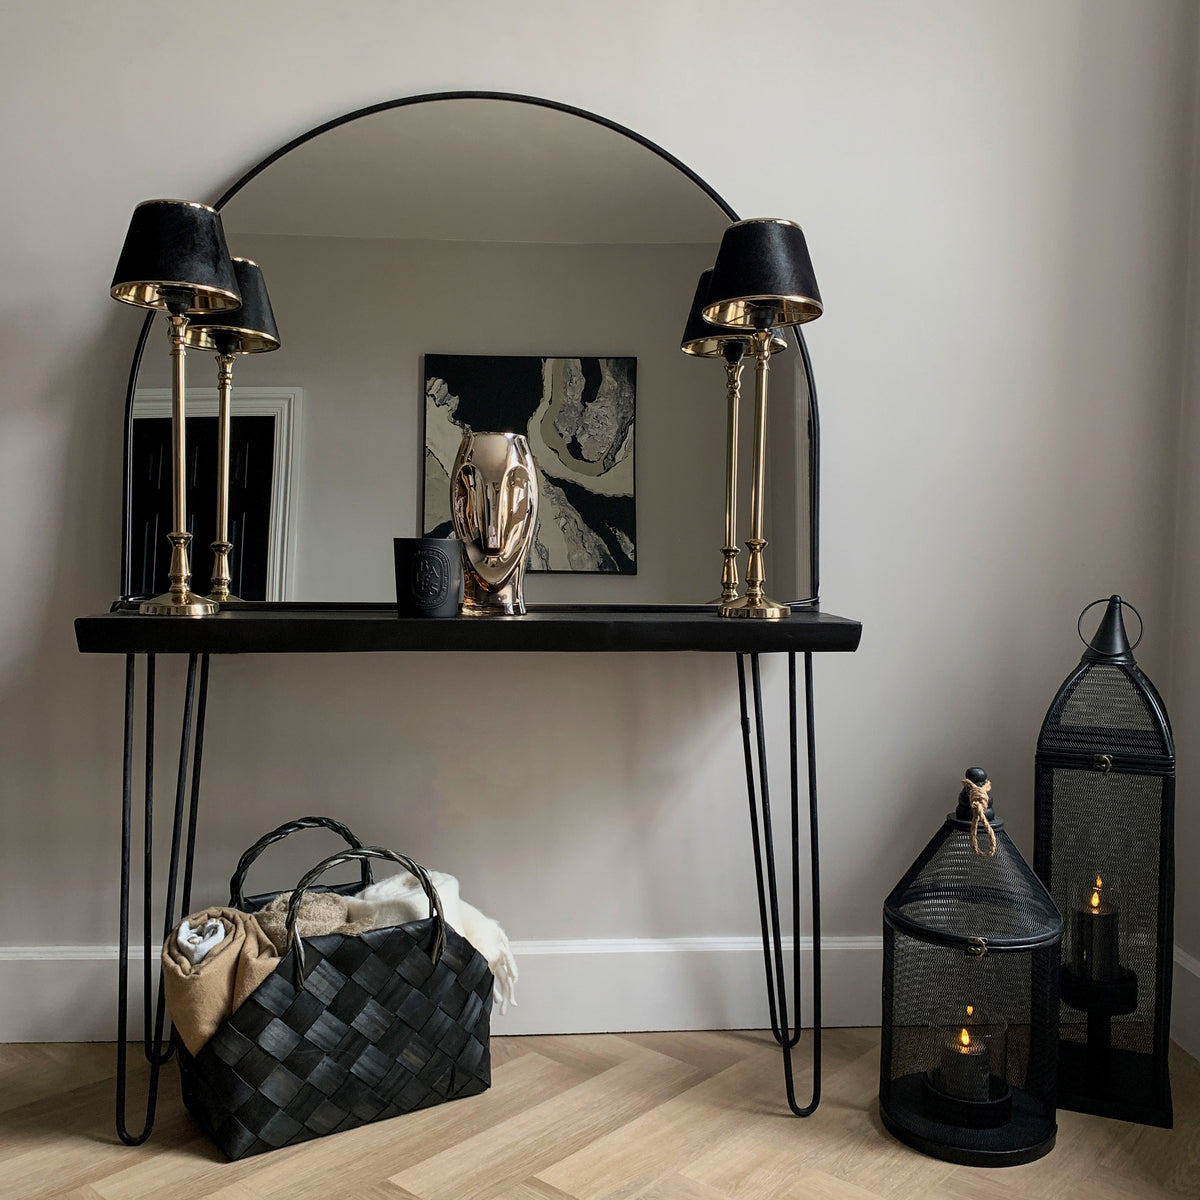 Black Wide Arched Metal Overmantle Mirror on console table